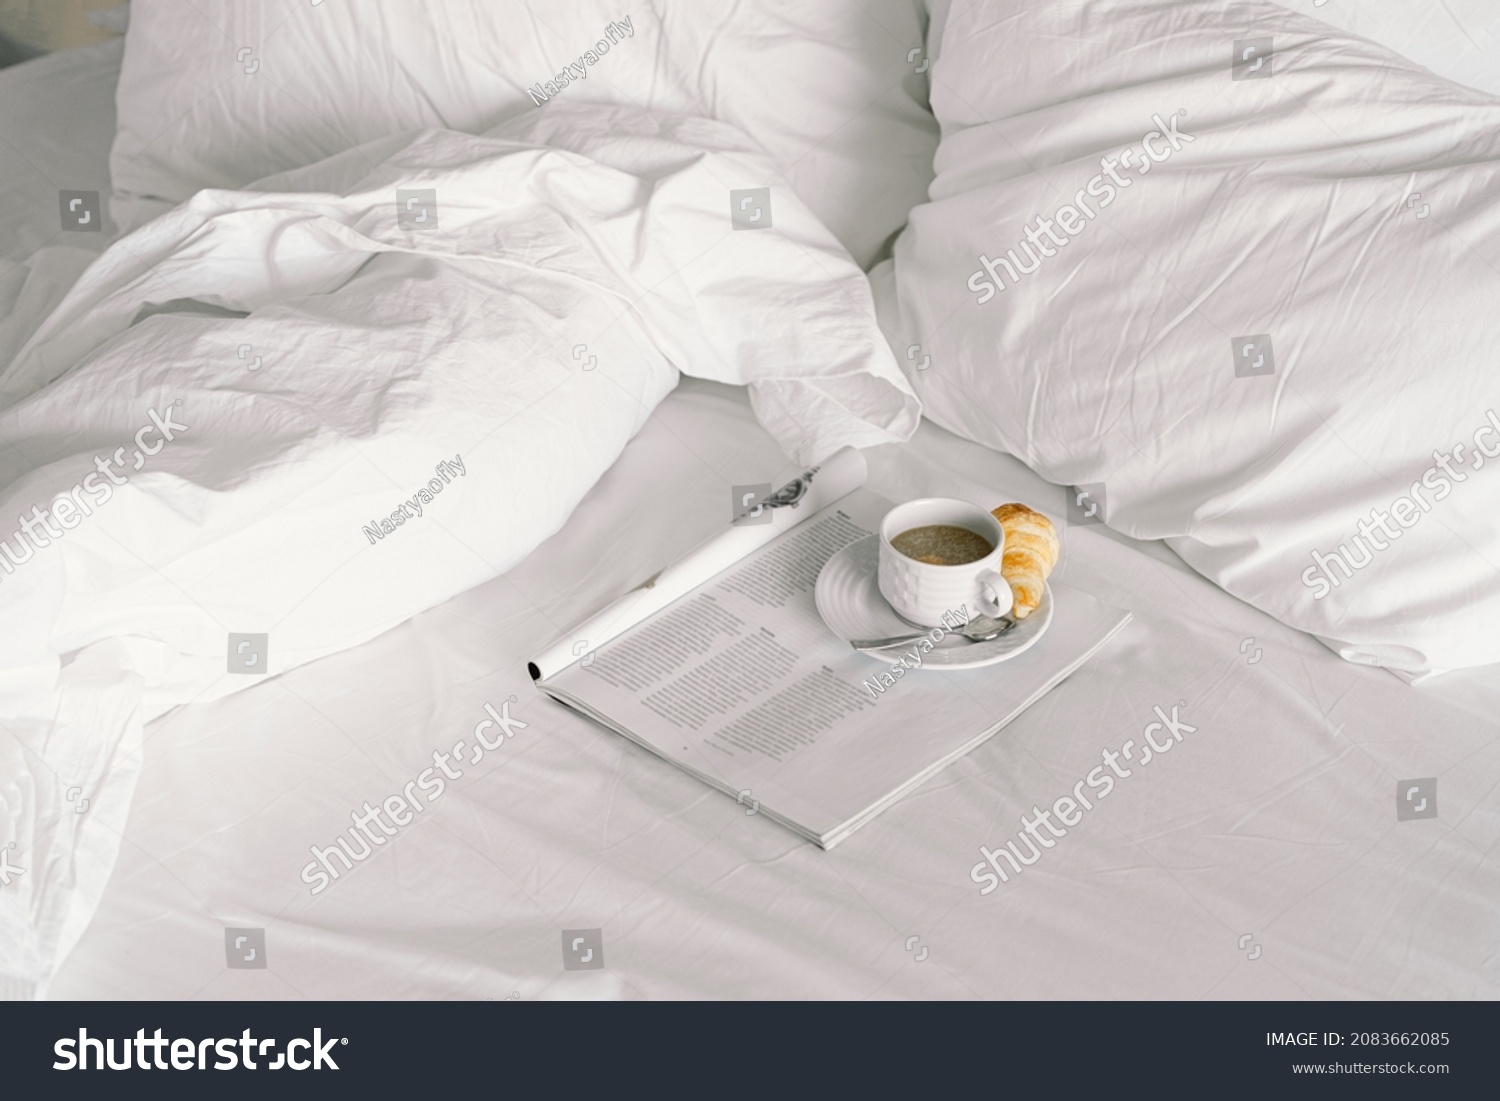 Breakfast on the bed in the hotel room. Breakfast in a snow-white bed, coffee with a croissant. Cozy morning. Breakfast in bed. #2083662085